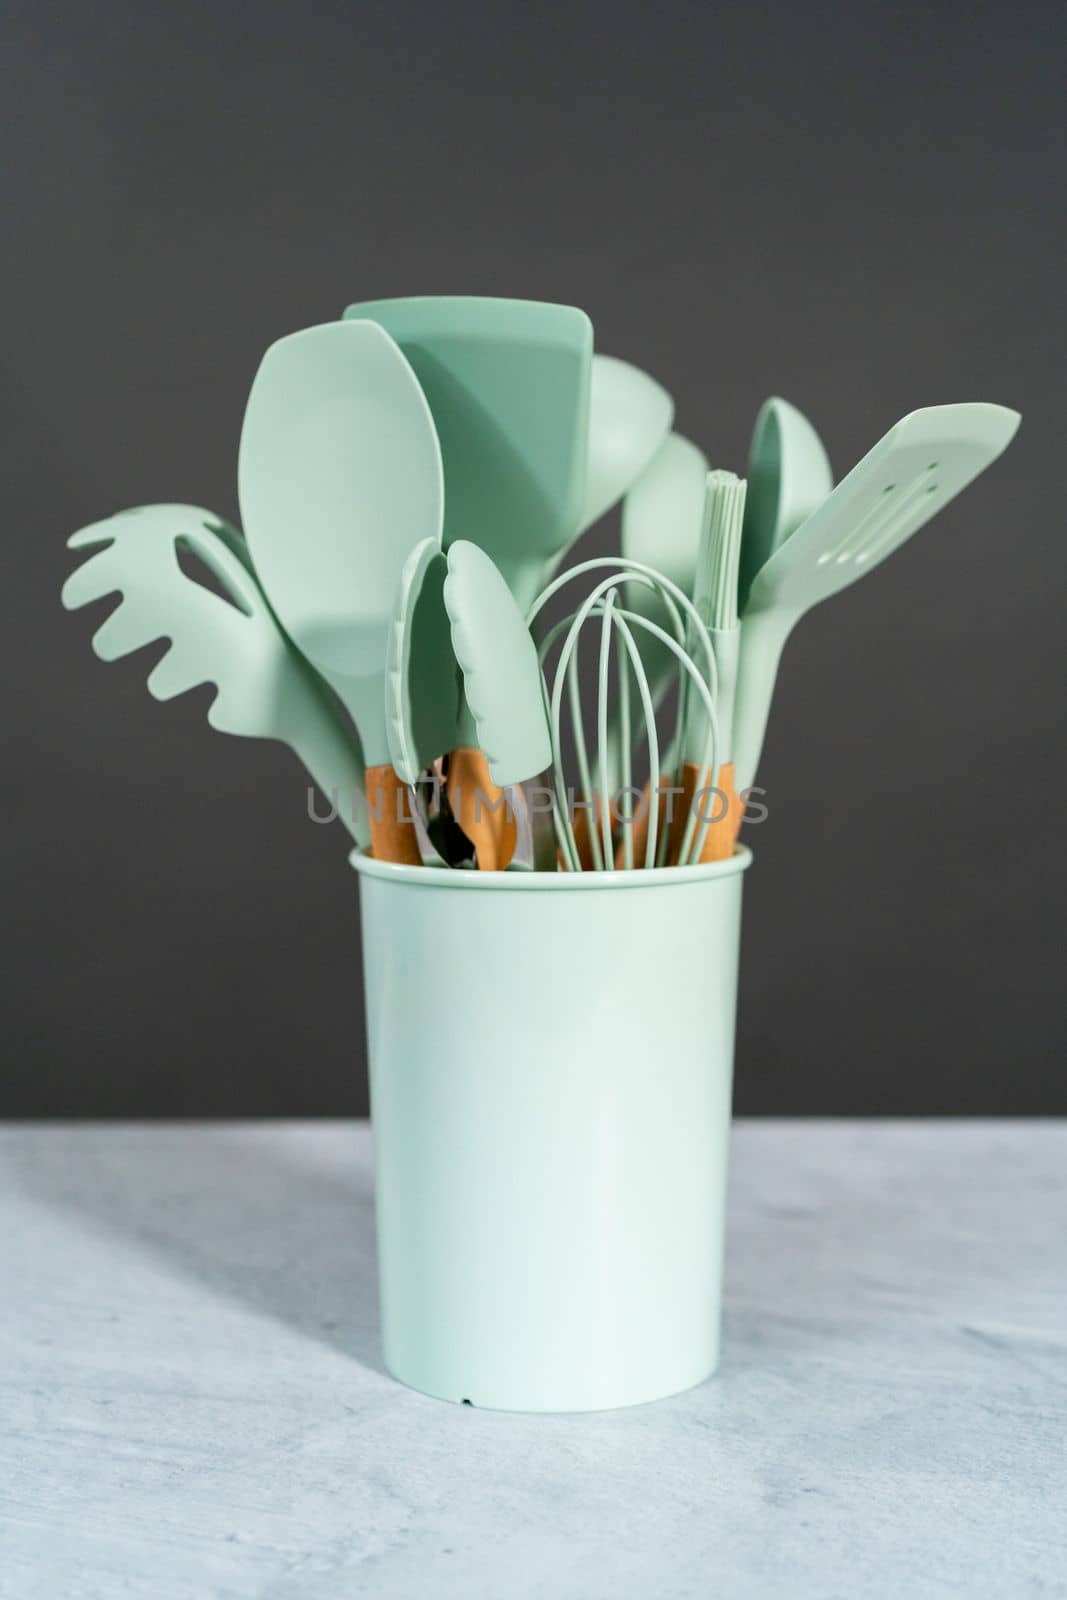 Silicone cooking utensils with wooden handle.